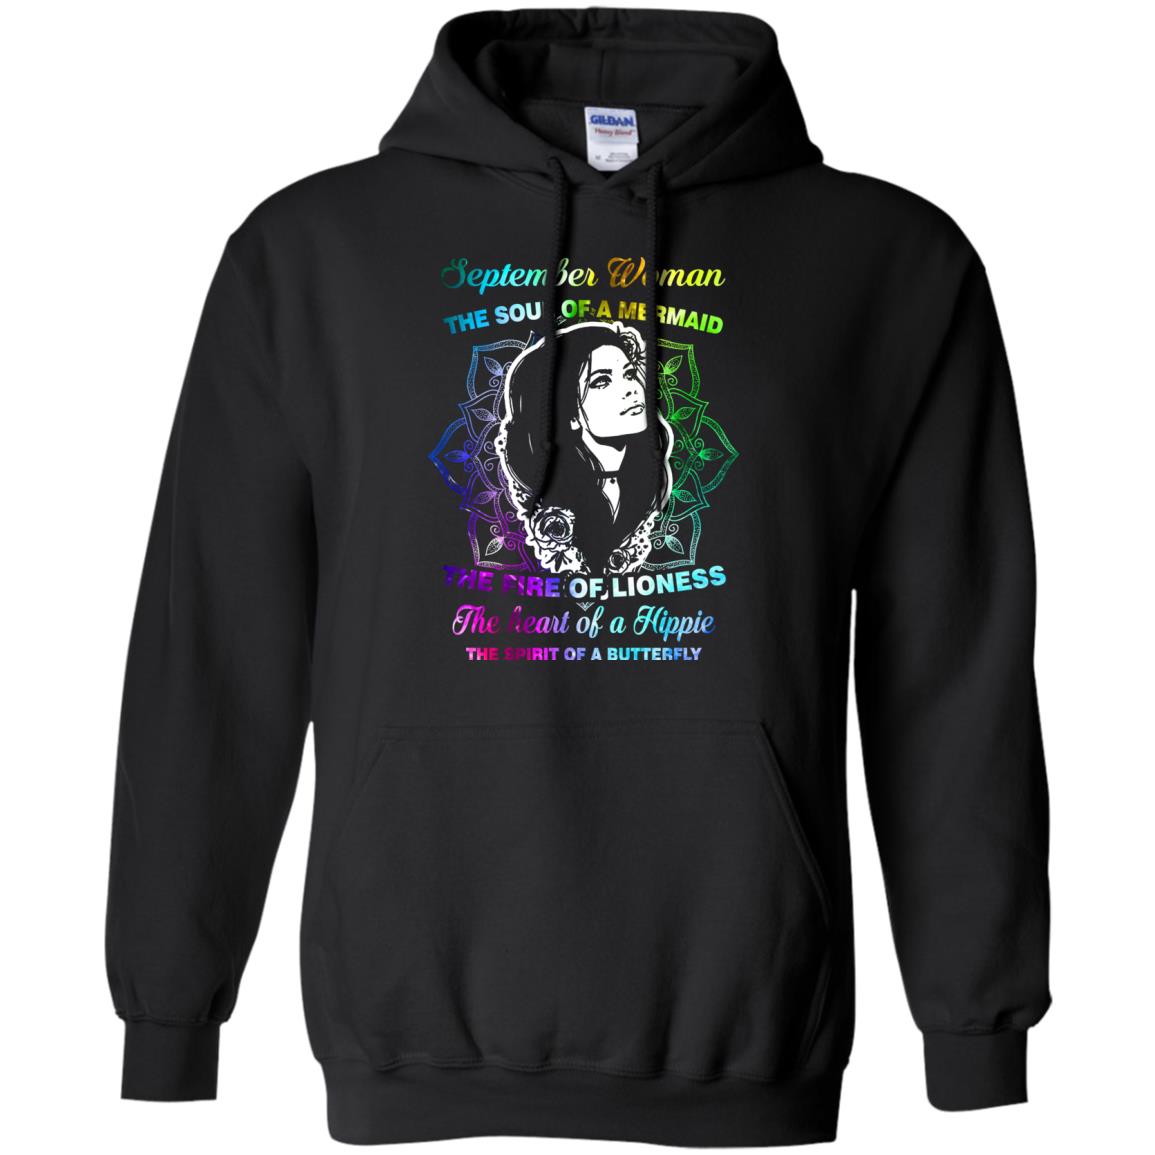 September Woman Shirt The Soul Of A Mermaid The Fire Of Lioness The Heart Of A Hippeie The Spirit Of A ButterflyG185 Gildan Pullover Hoodie 8 oz.